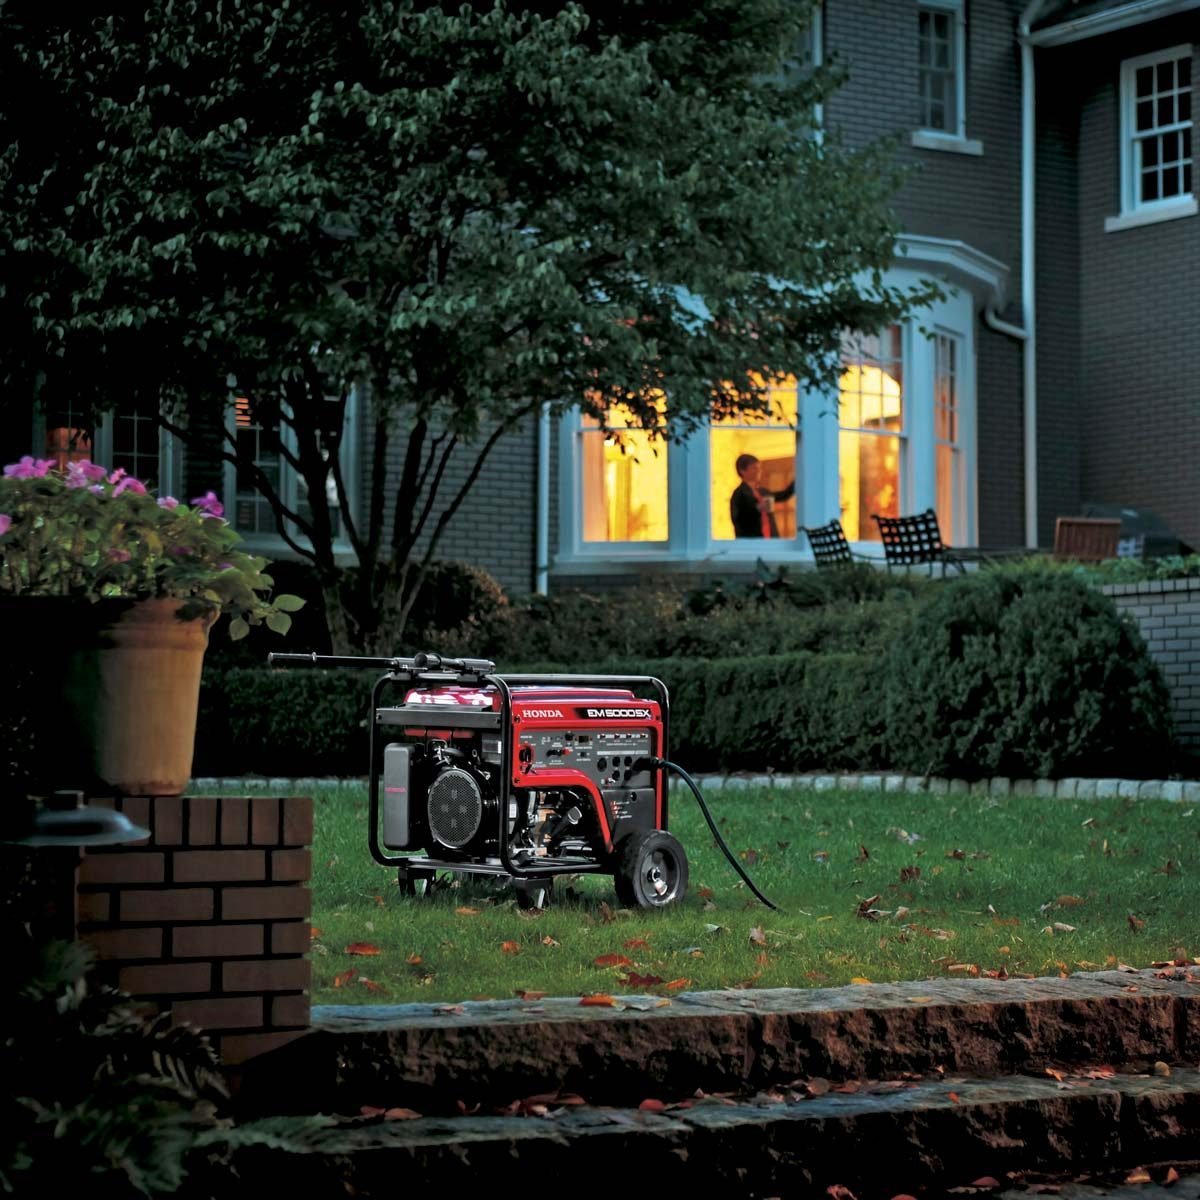 Tips for Using a Portable Generator Safely During an Emergency